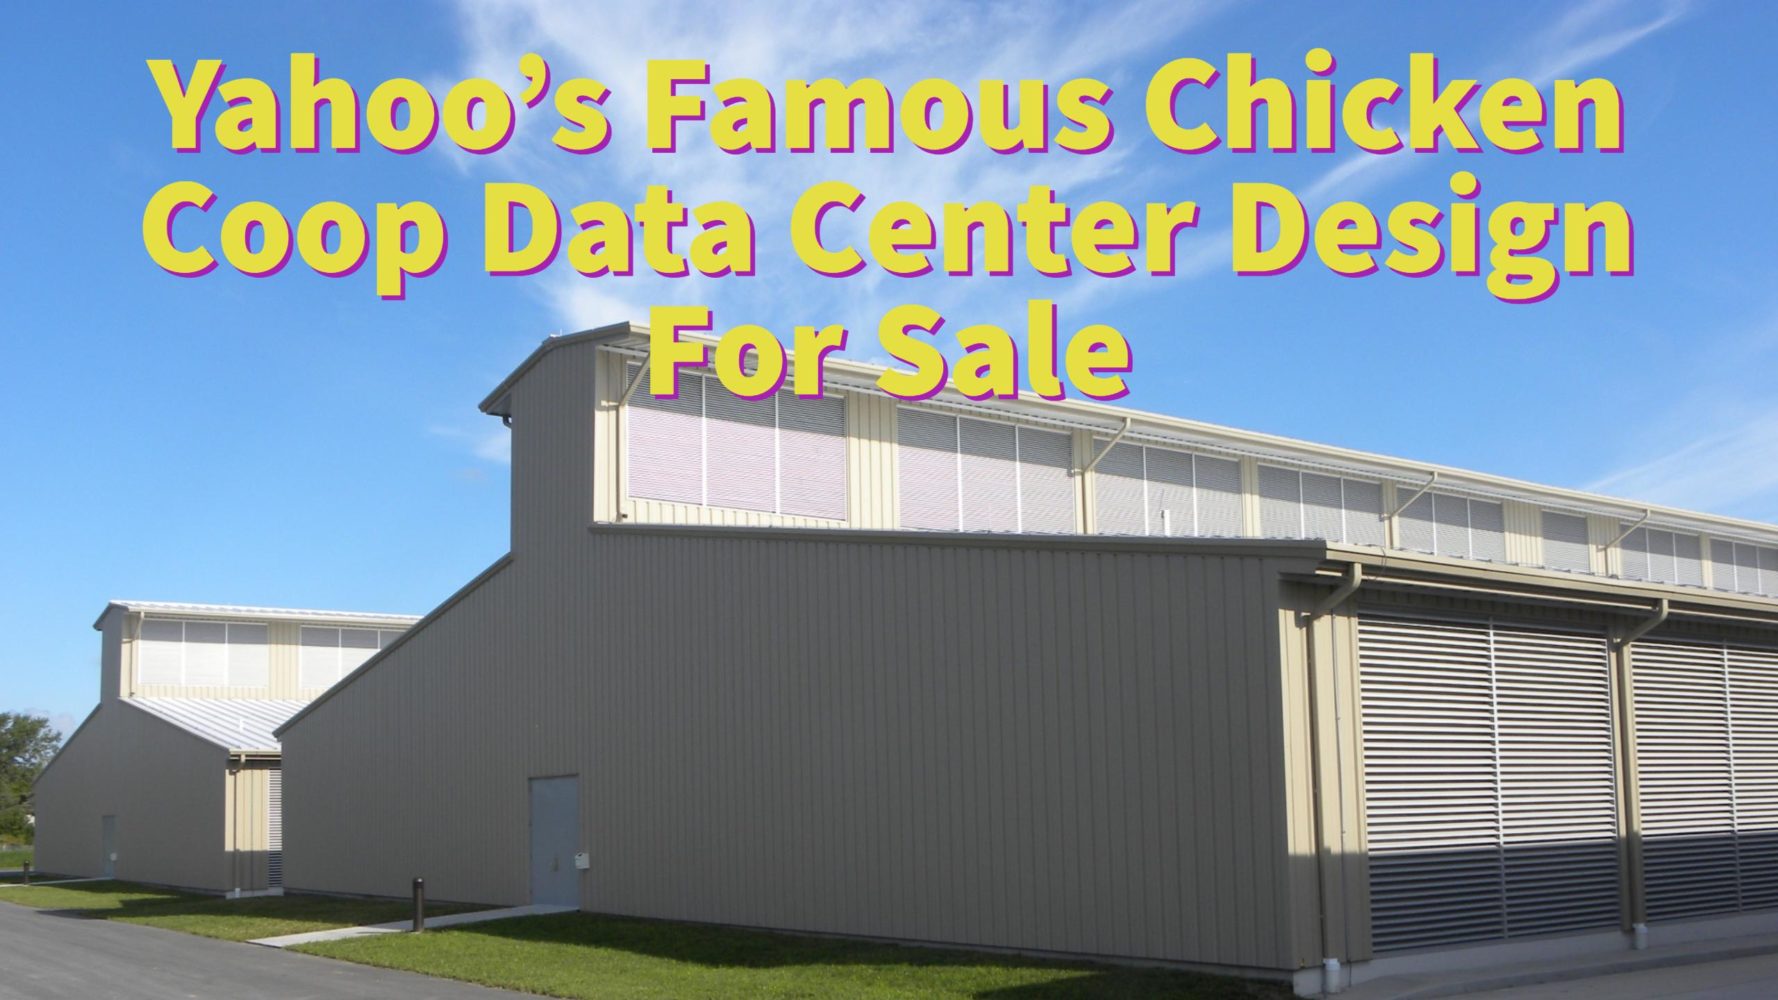 Yahoo’s Famous Chicken Coop Data Center Design For Sale